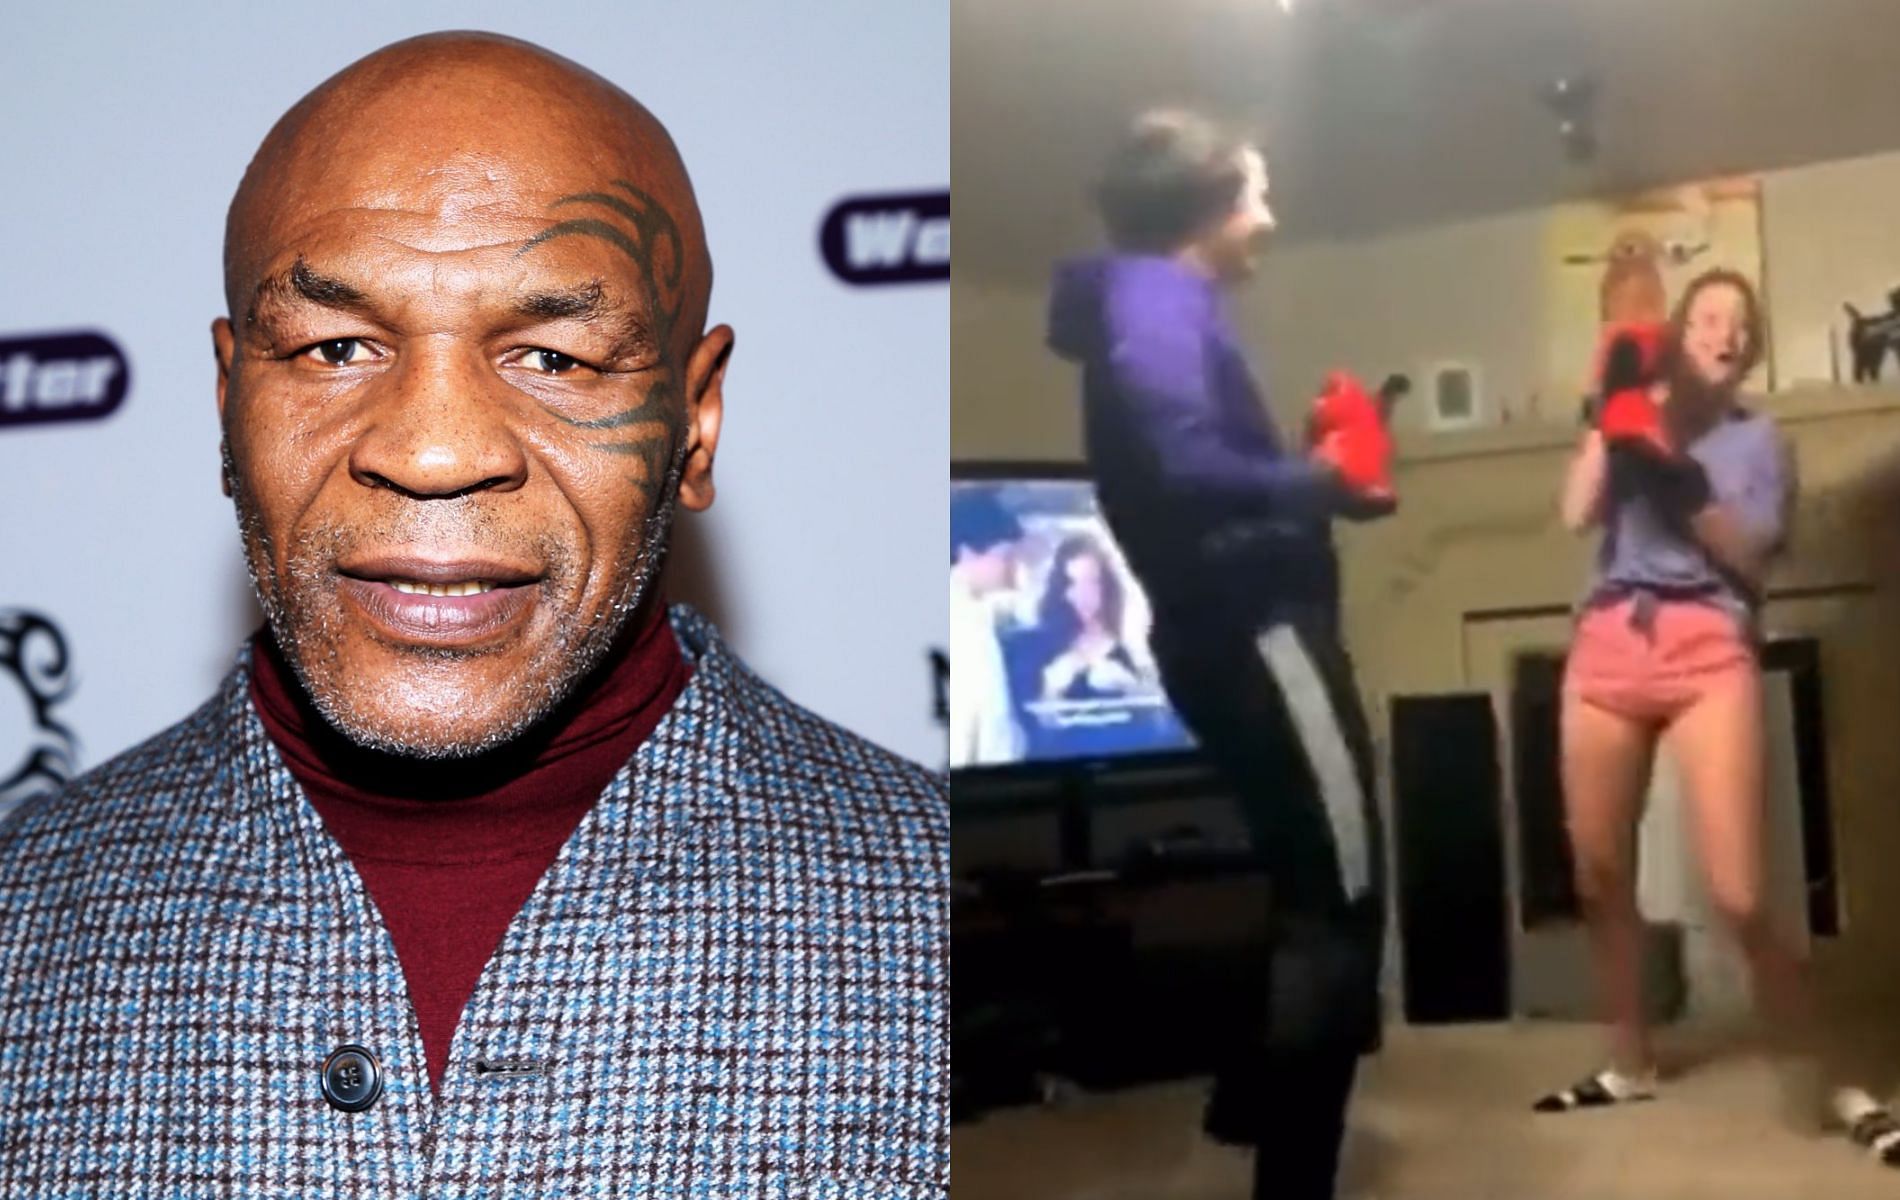 Mike Tyson compared to woman landing vicious punch